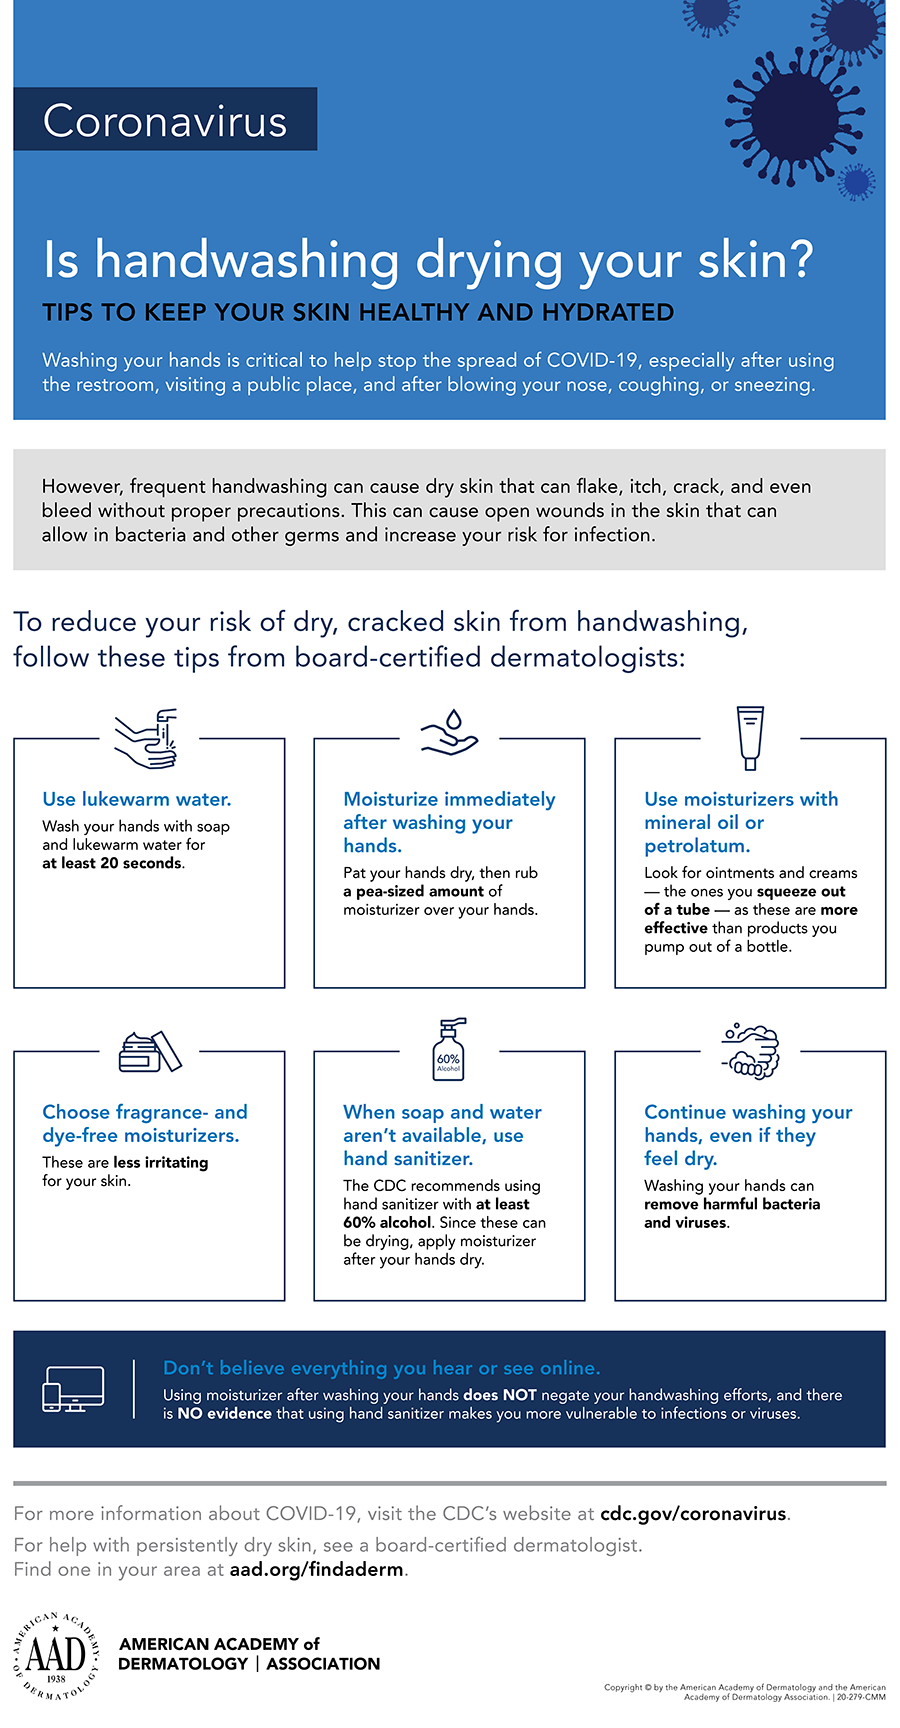 Infographic providing tips to help keep your skin healthy and hydrated during the frequent COVID-19 (Coronavirus) handwashing.